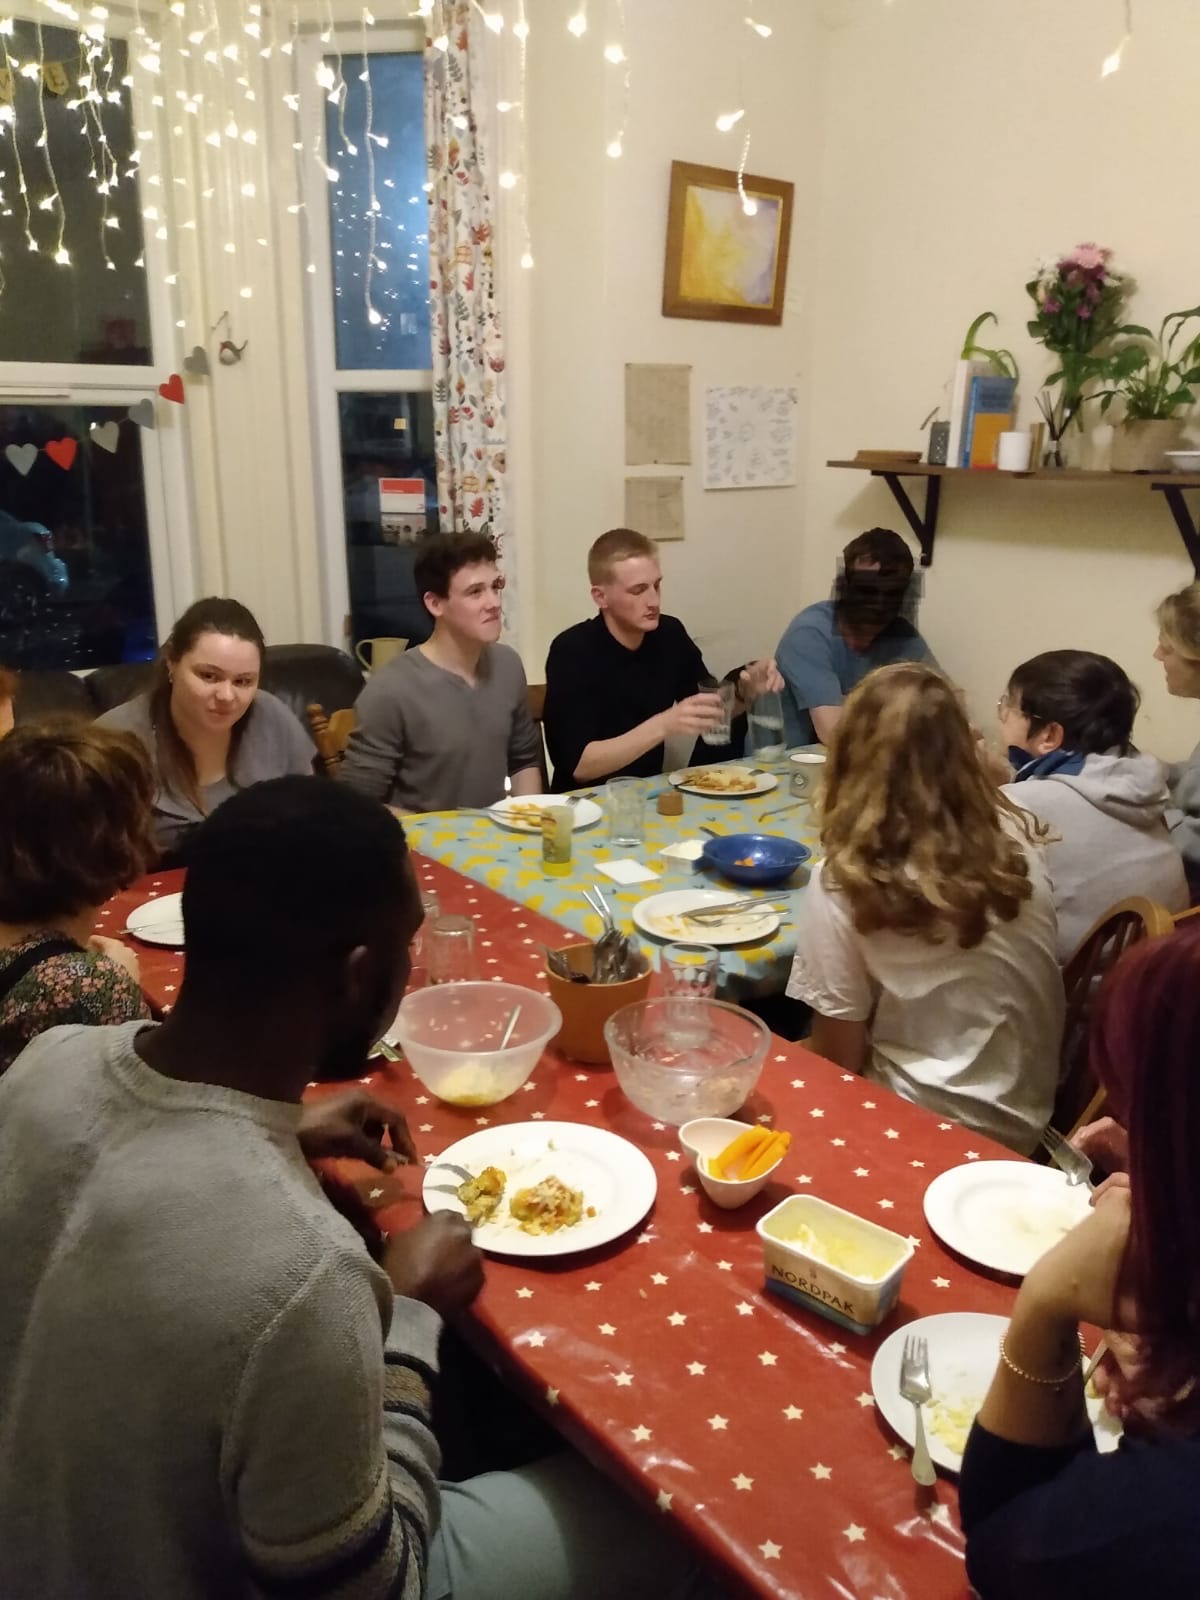 Photo shows friendly dinner in missional house where crack cocaine and drugs used to be peddled